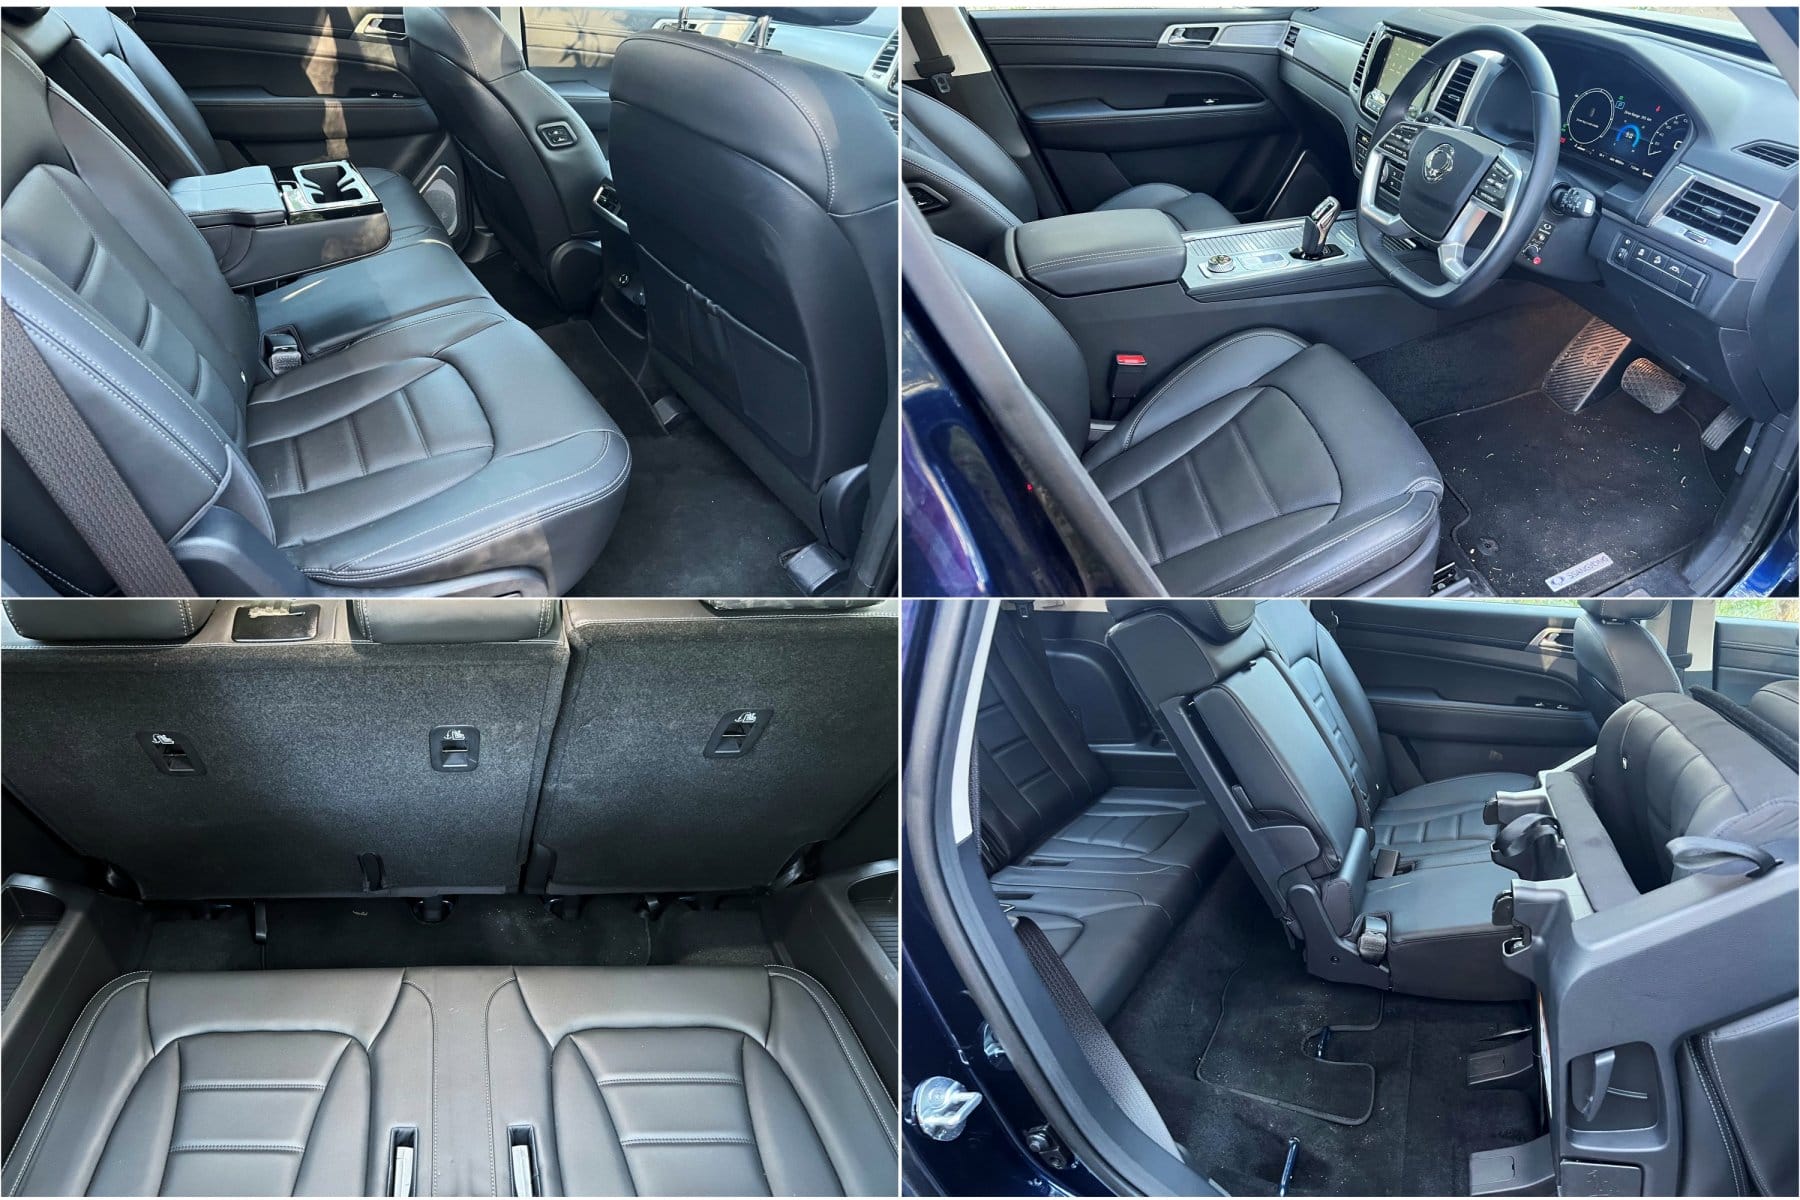 2022 SsangYong Rexton Ultimate seats leg room 4 pic